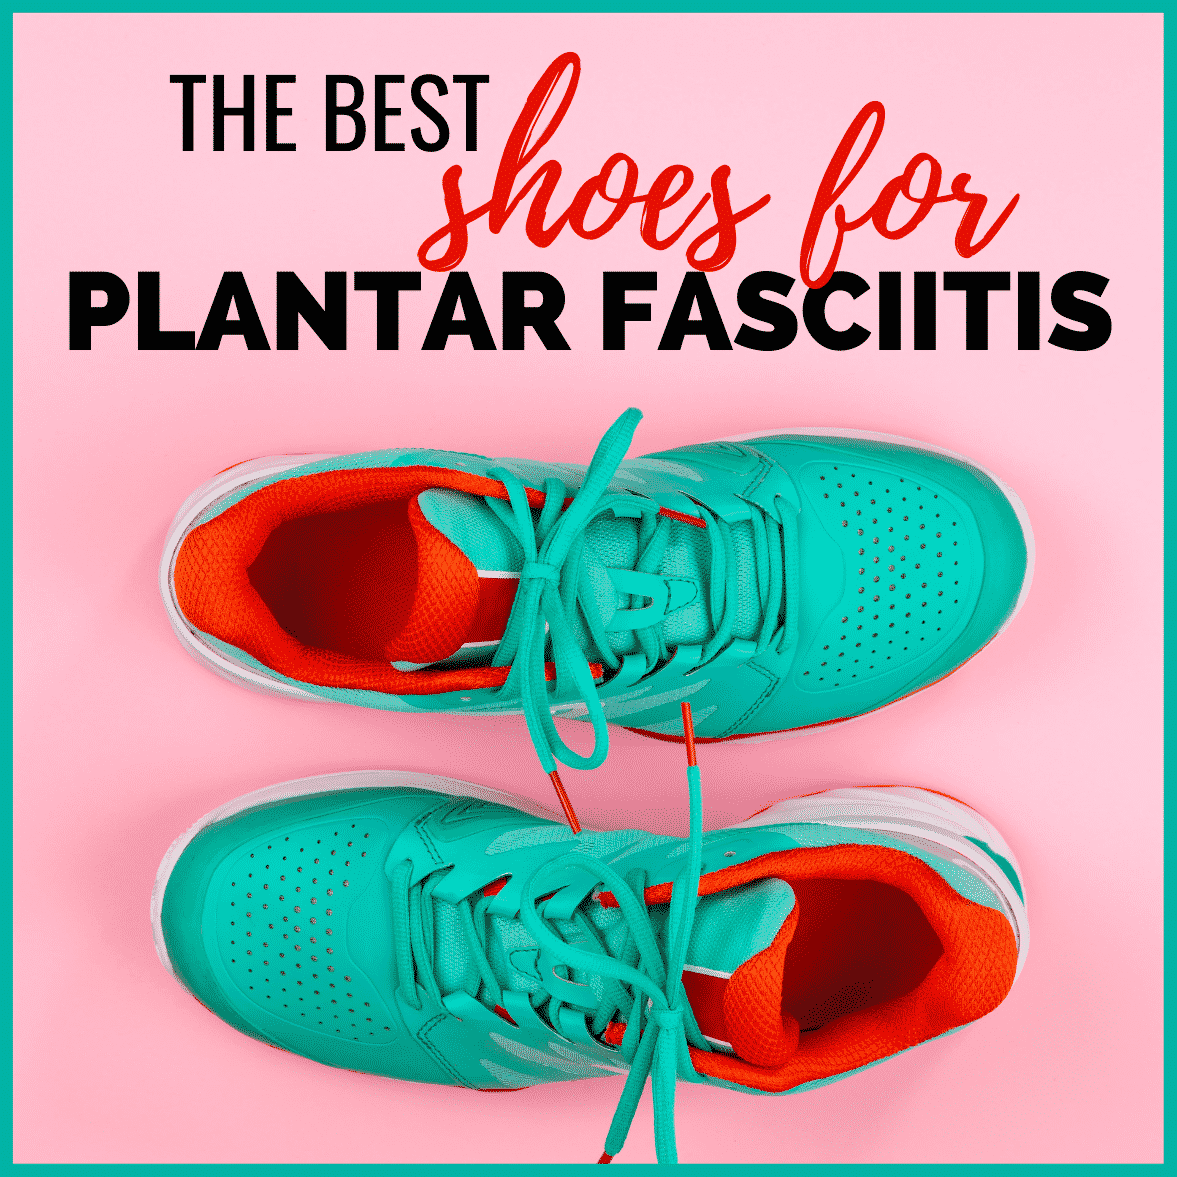 How To Choose Shoes For Plantar Fasciitis, According To Experts | lupon ...